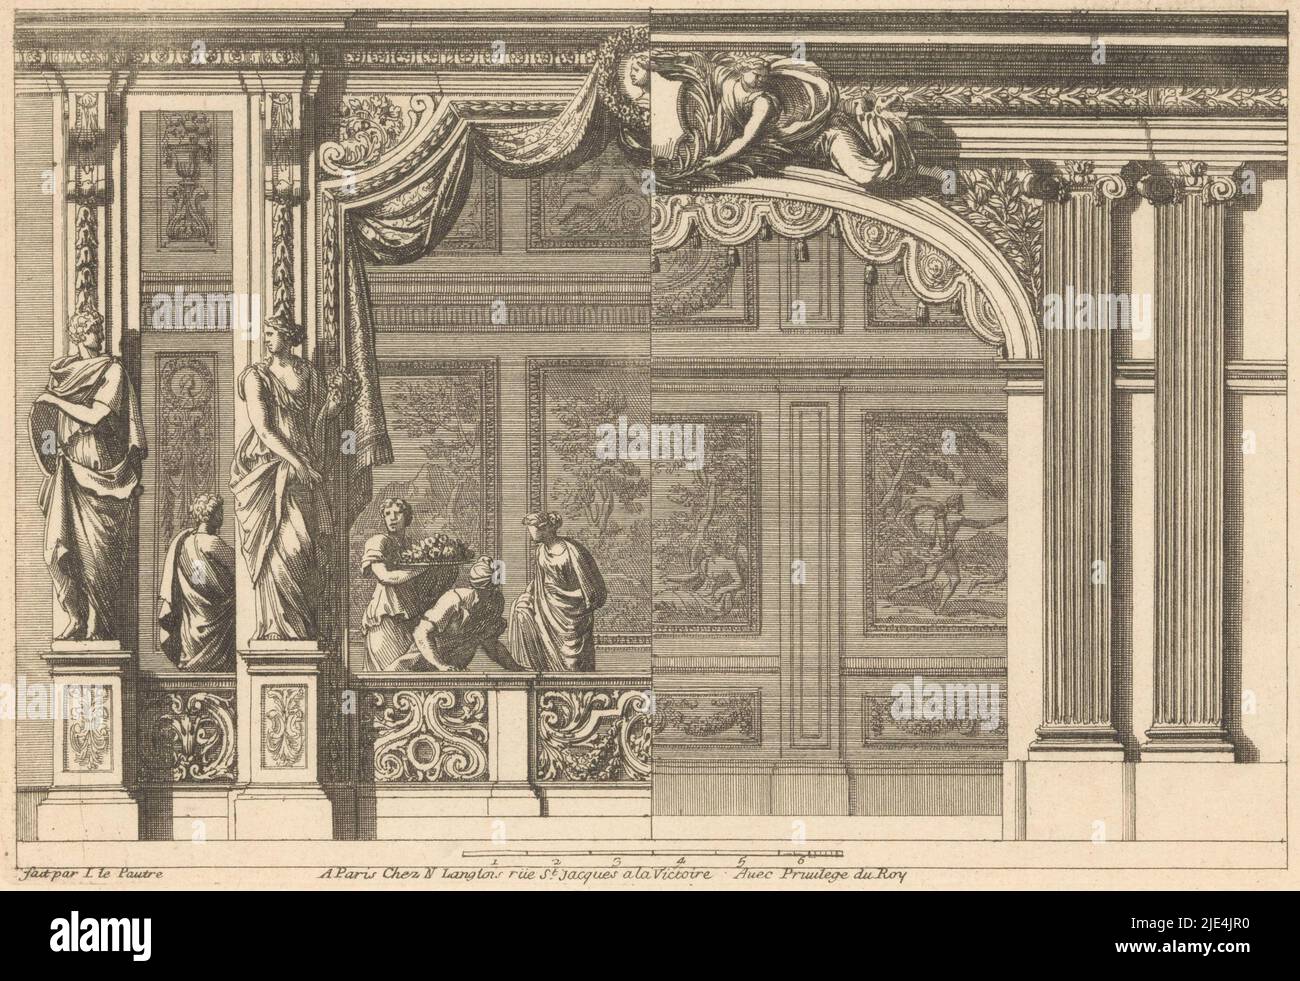 Alcove with variant for right half, Jean Lepautre, 1678, The alcove on the left is closed by a balustrade decorated with foliate vines and two sculptures. The right side is a variant with two Ionic pilasters., print maker: Jean Lepautre, (mentioned on object), Jean Lepautre, publisher: Nicolas Langlois (I), (mentioned on object), Paris, 1678, paper, etching, h 143 mm × w 210 mm Stock Photo